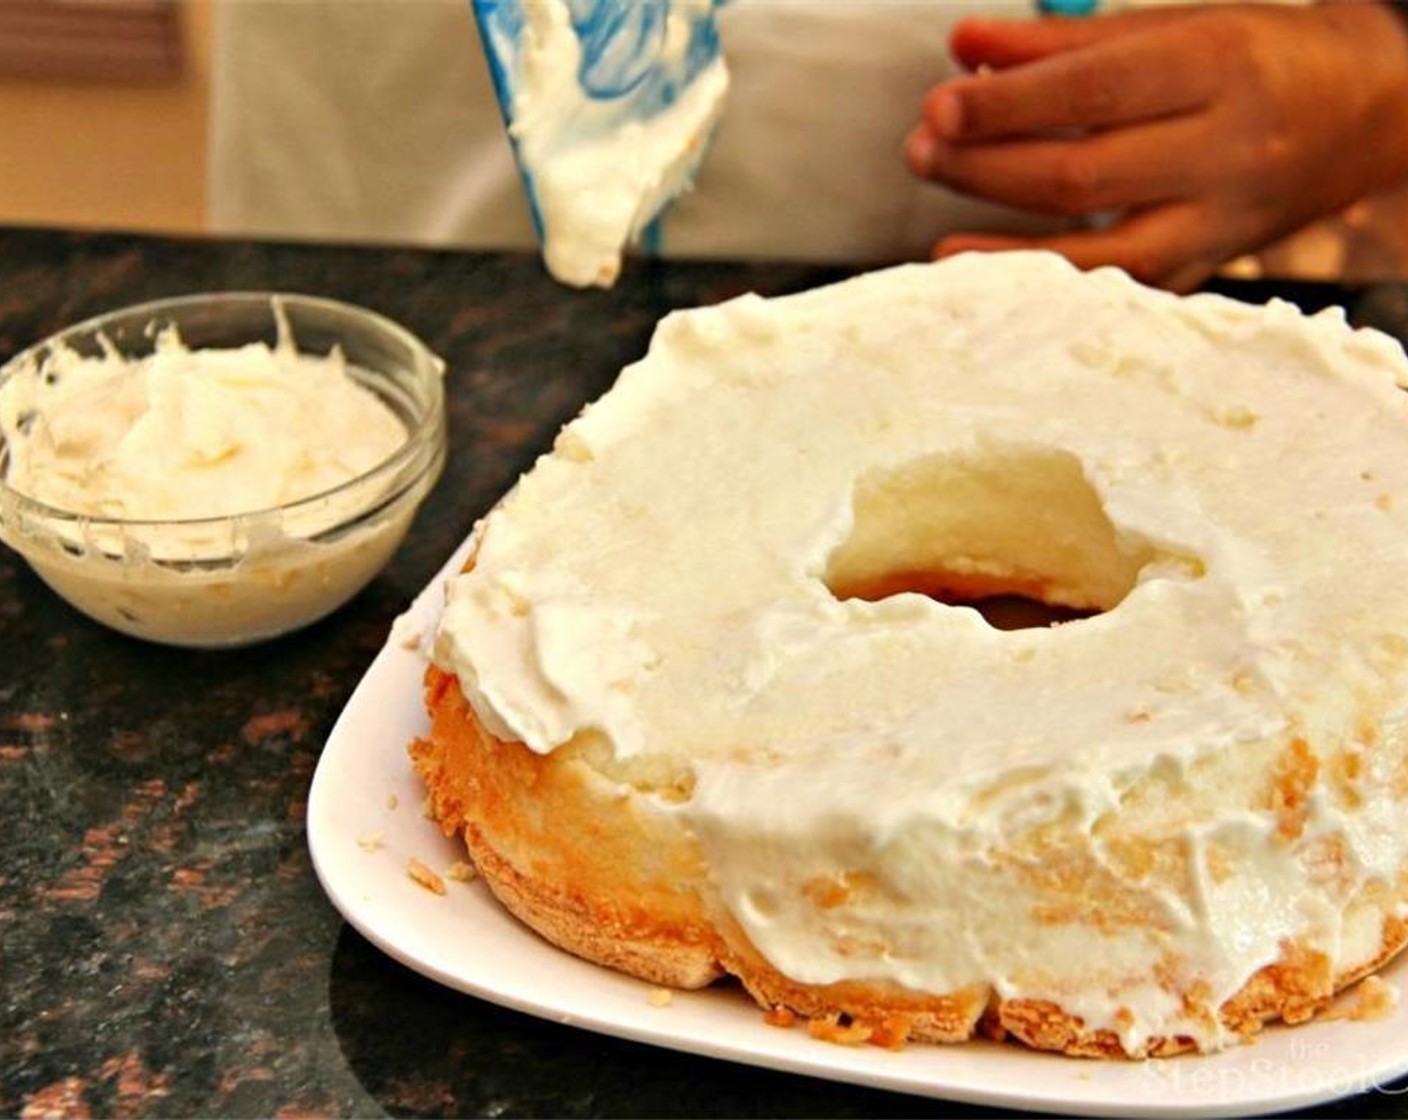 step 4 Spread half the Whipped Cream (1 1/2 cups) on the bottom half of the cake on the top and sides as you would when icing a cake.